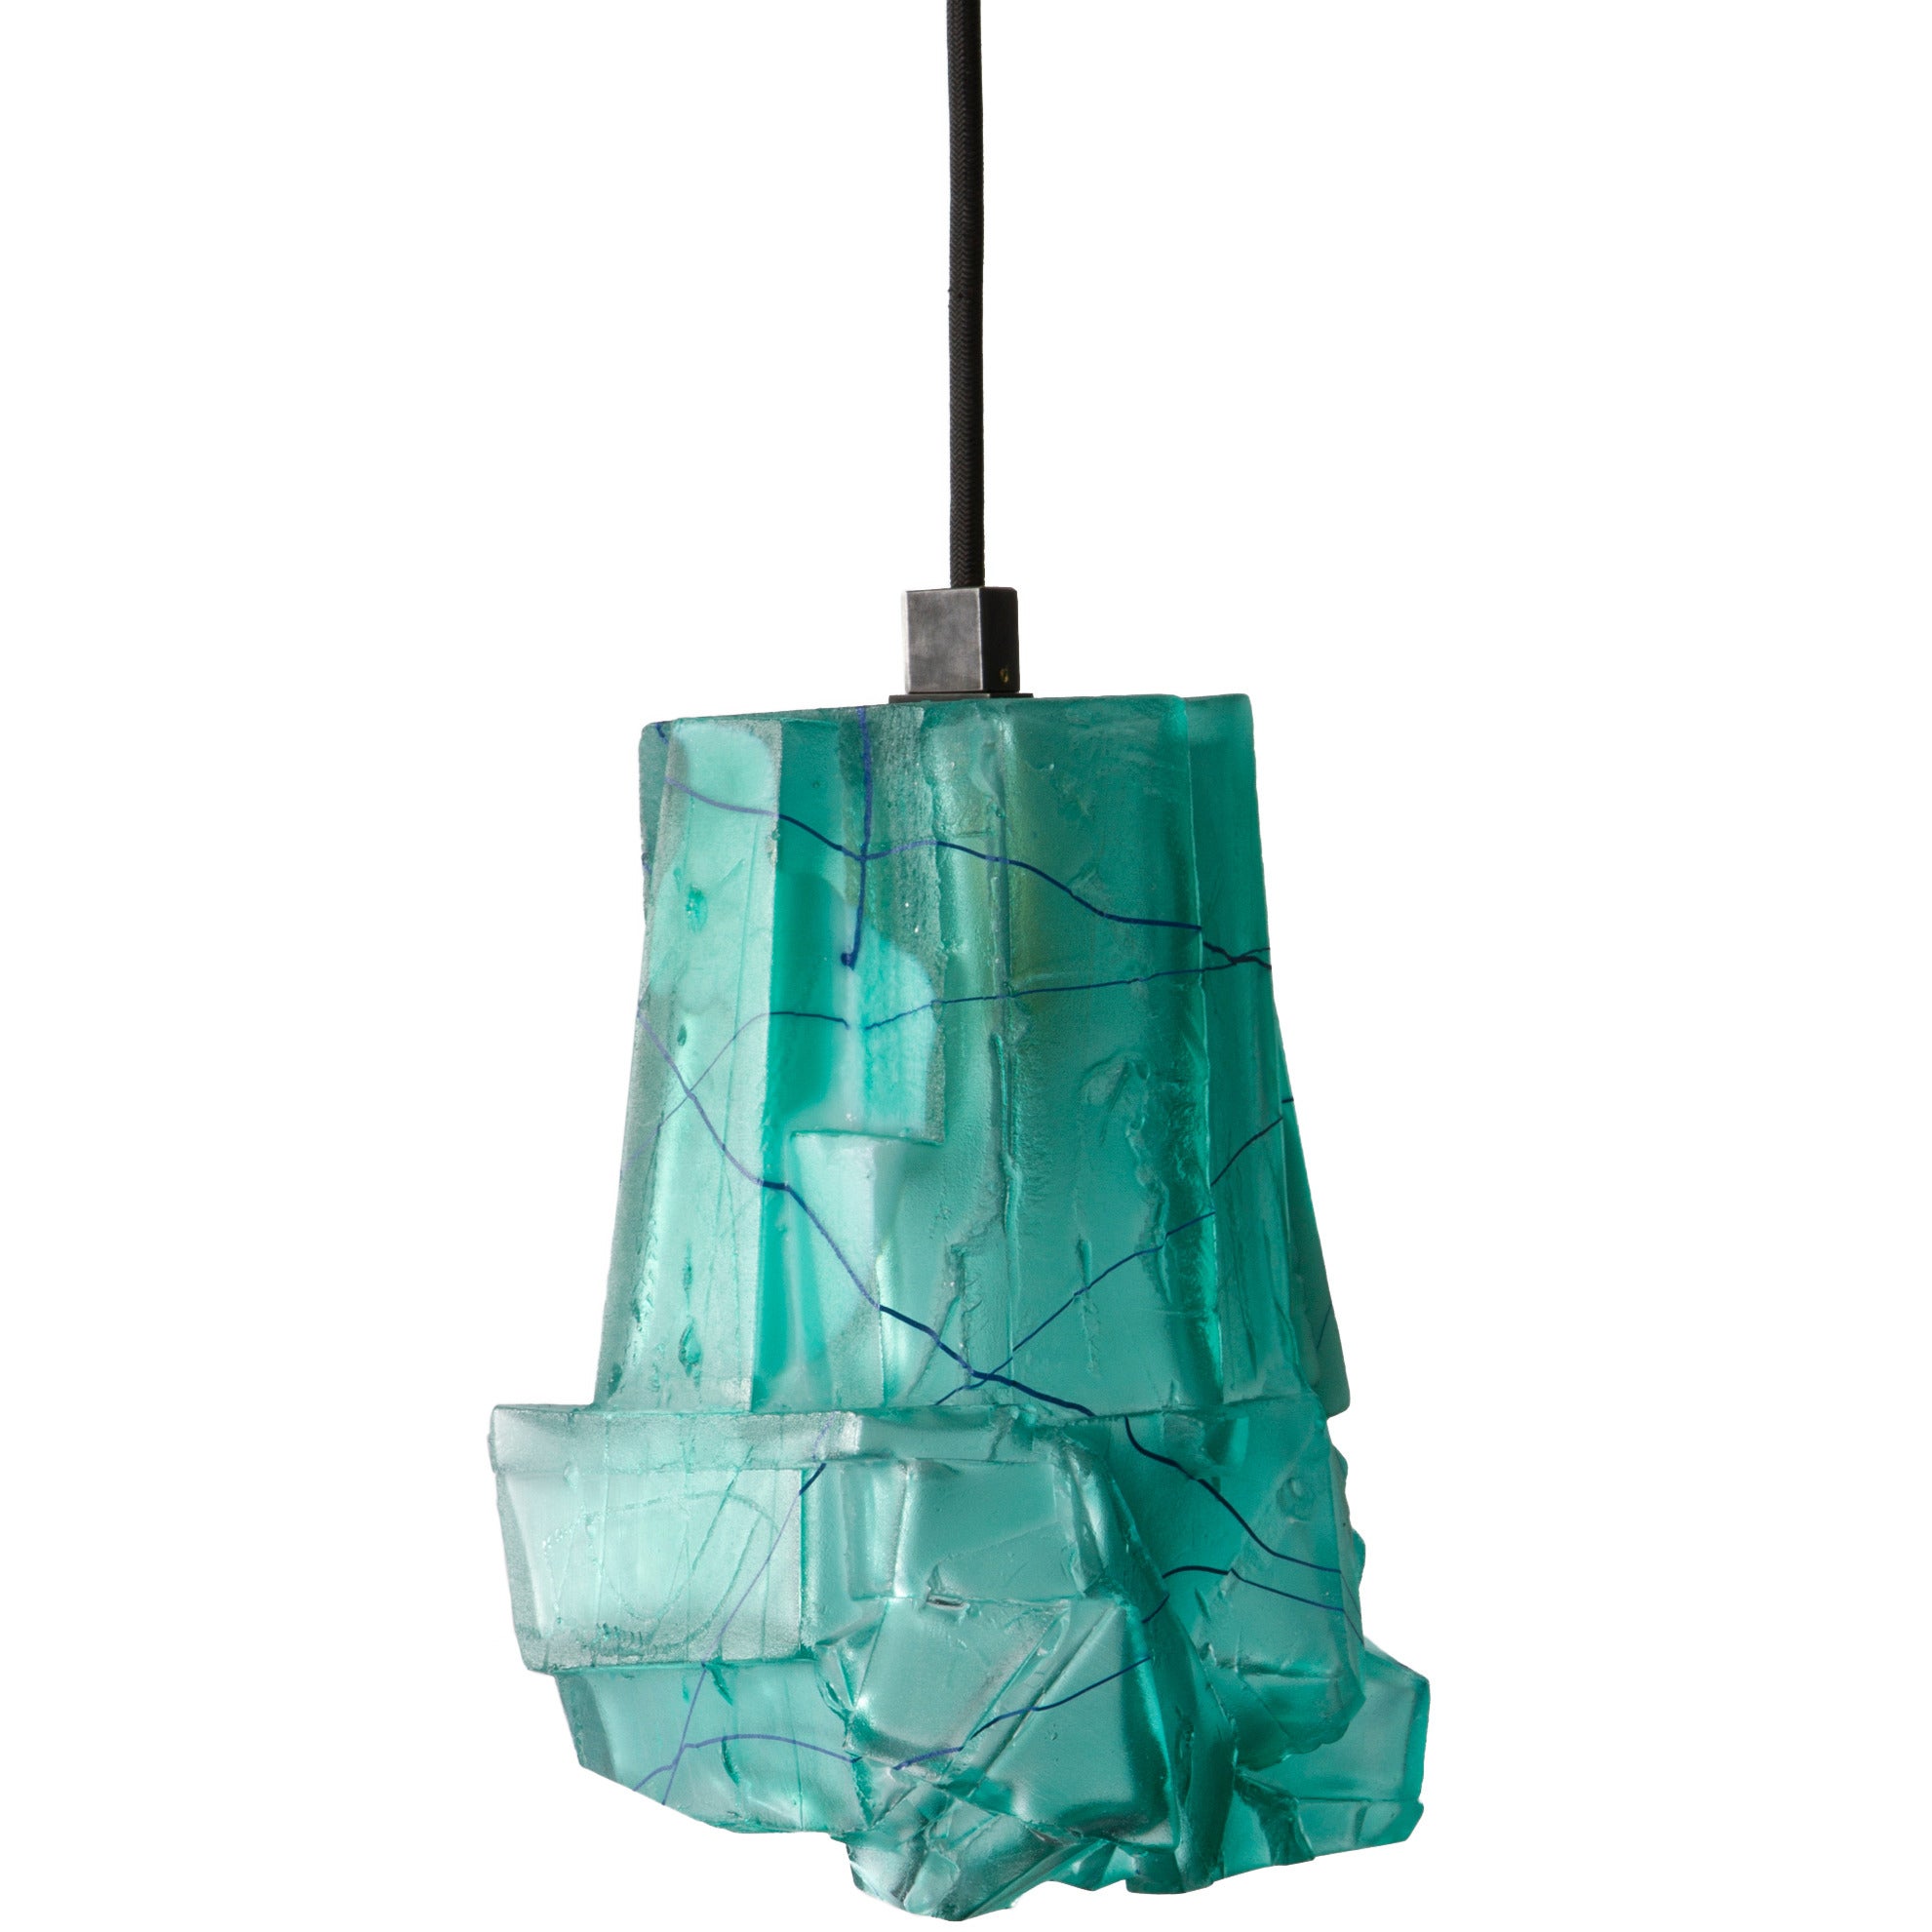 Unique pendant lamp in hand-blown, cut and polished glass. By Thaddeus Wolfe